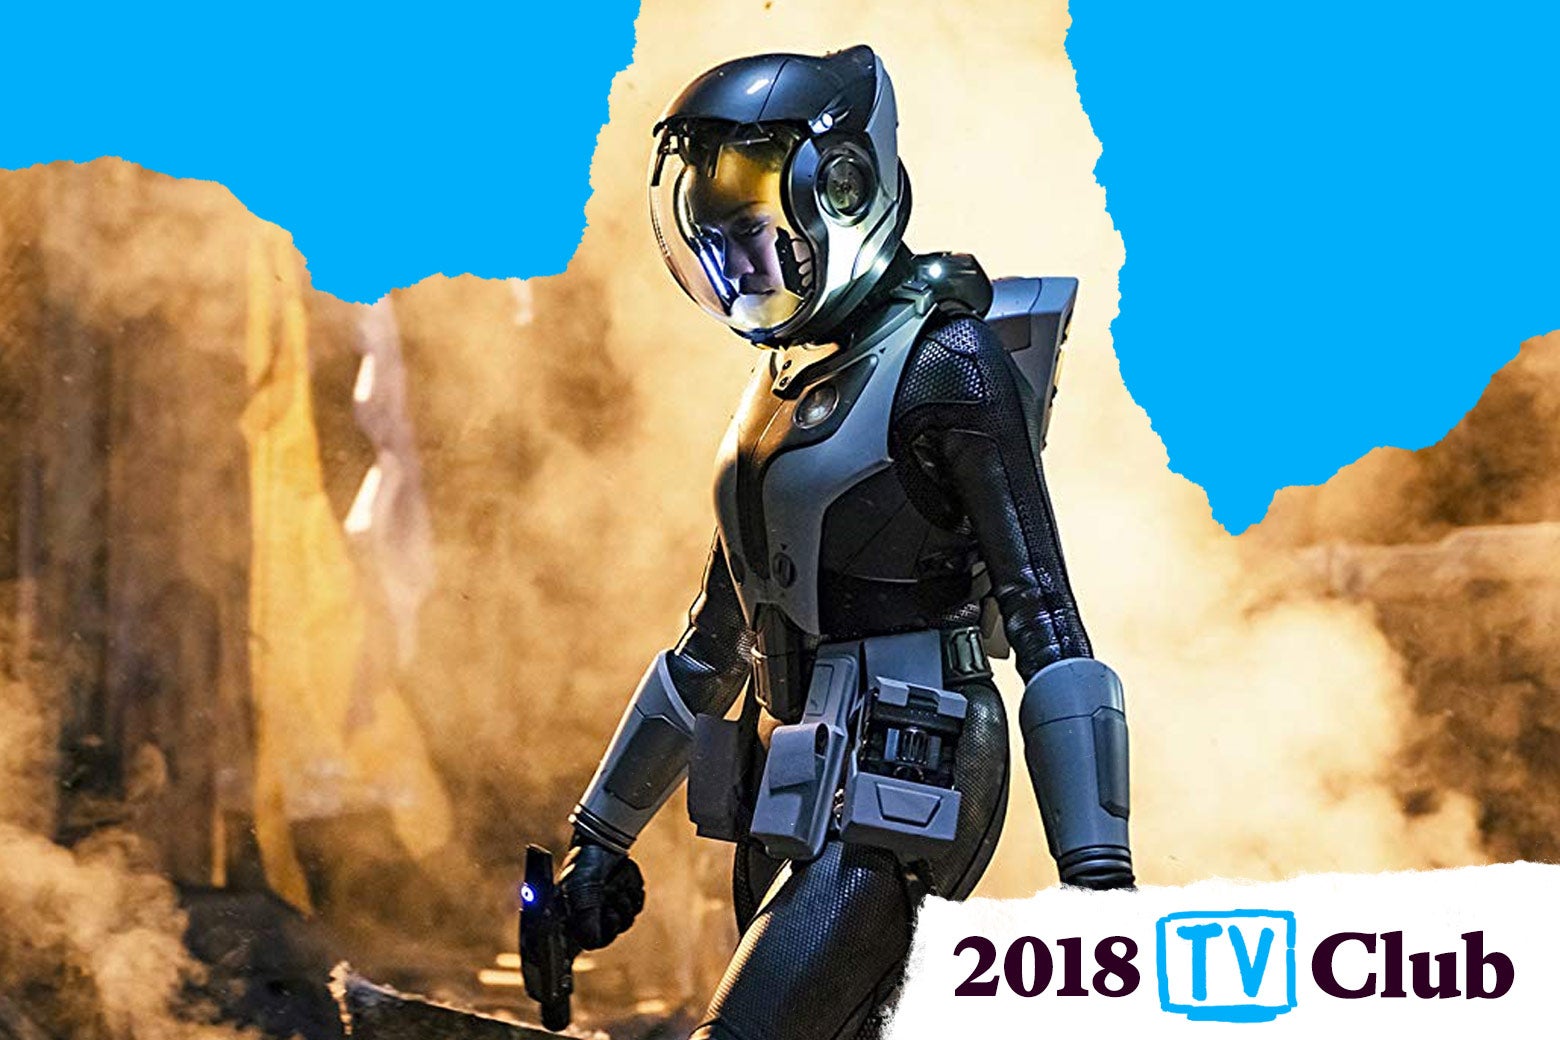 Still of spacesuited person from Star Trek Discovery with TV Club 2018 logo